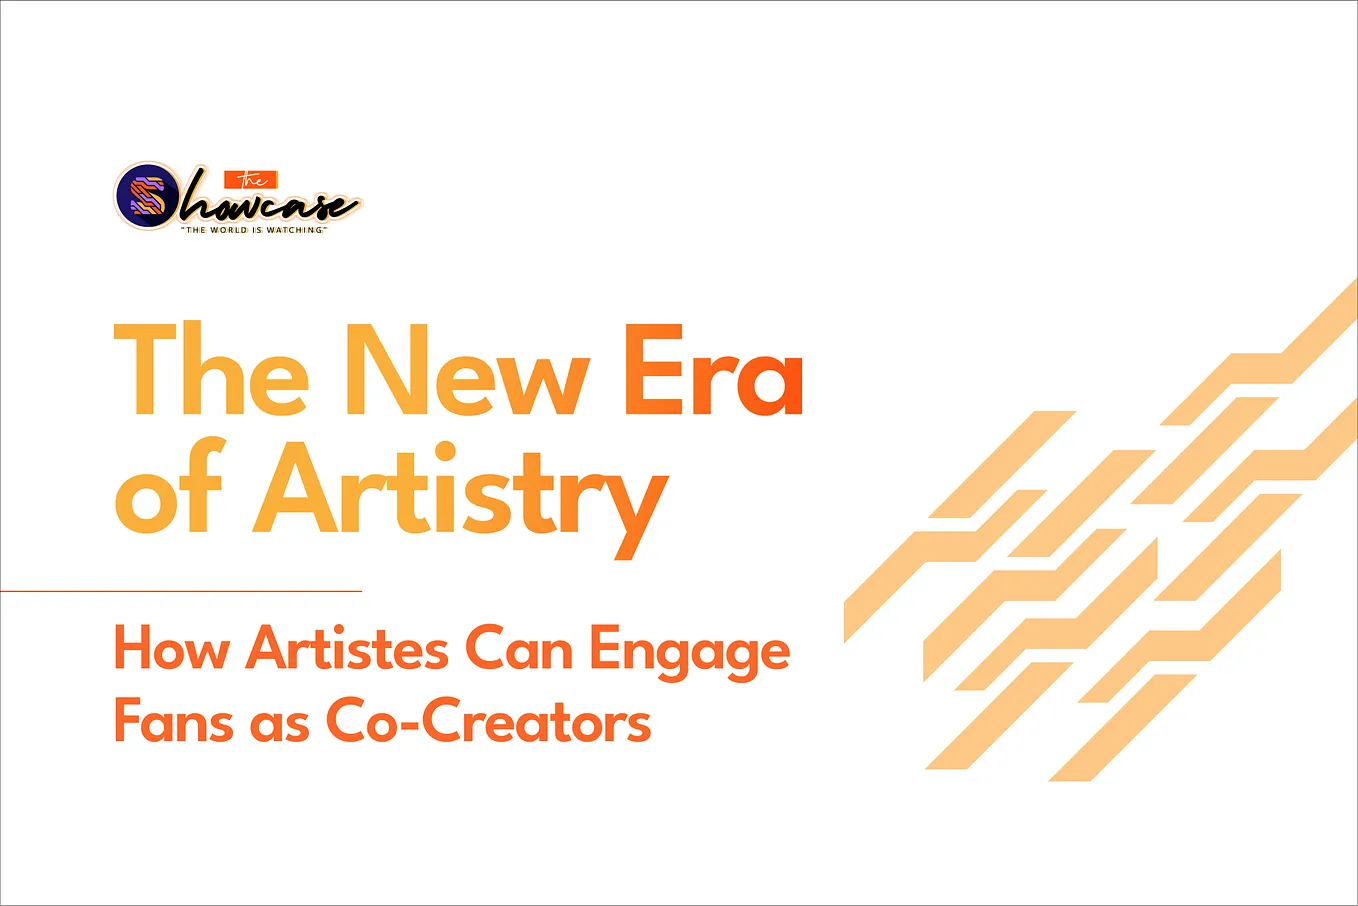 The New Era of Artistry: How Artistes Can Engage Fans as Co-Creators